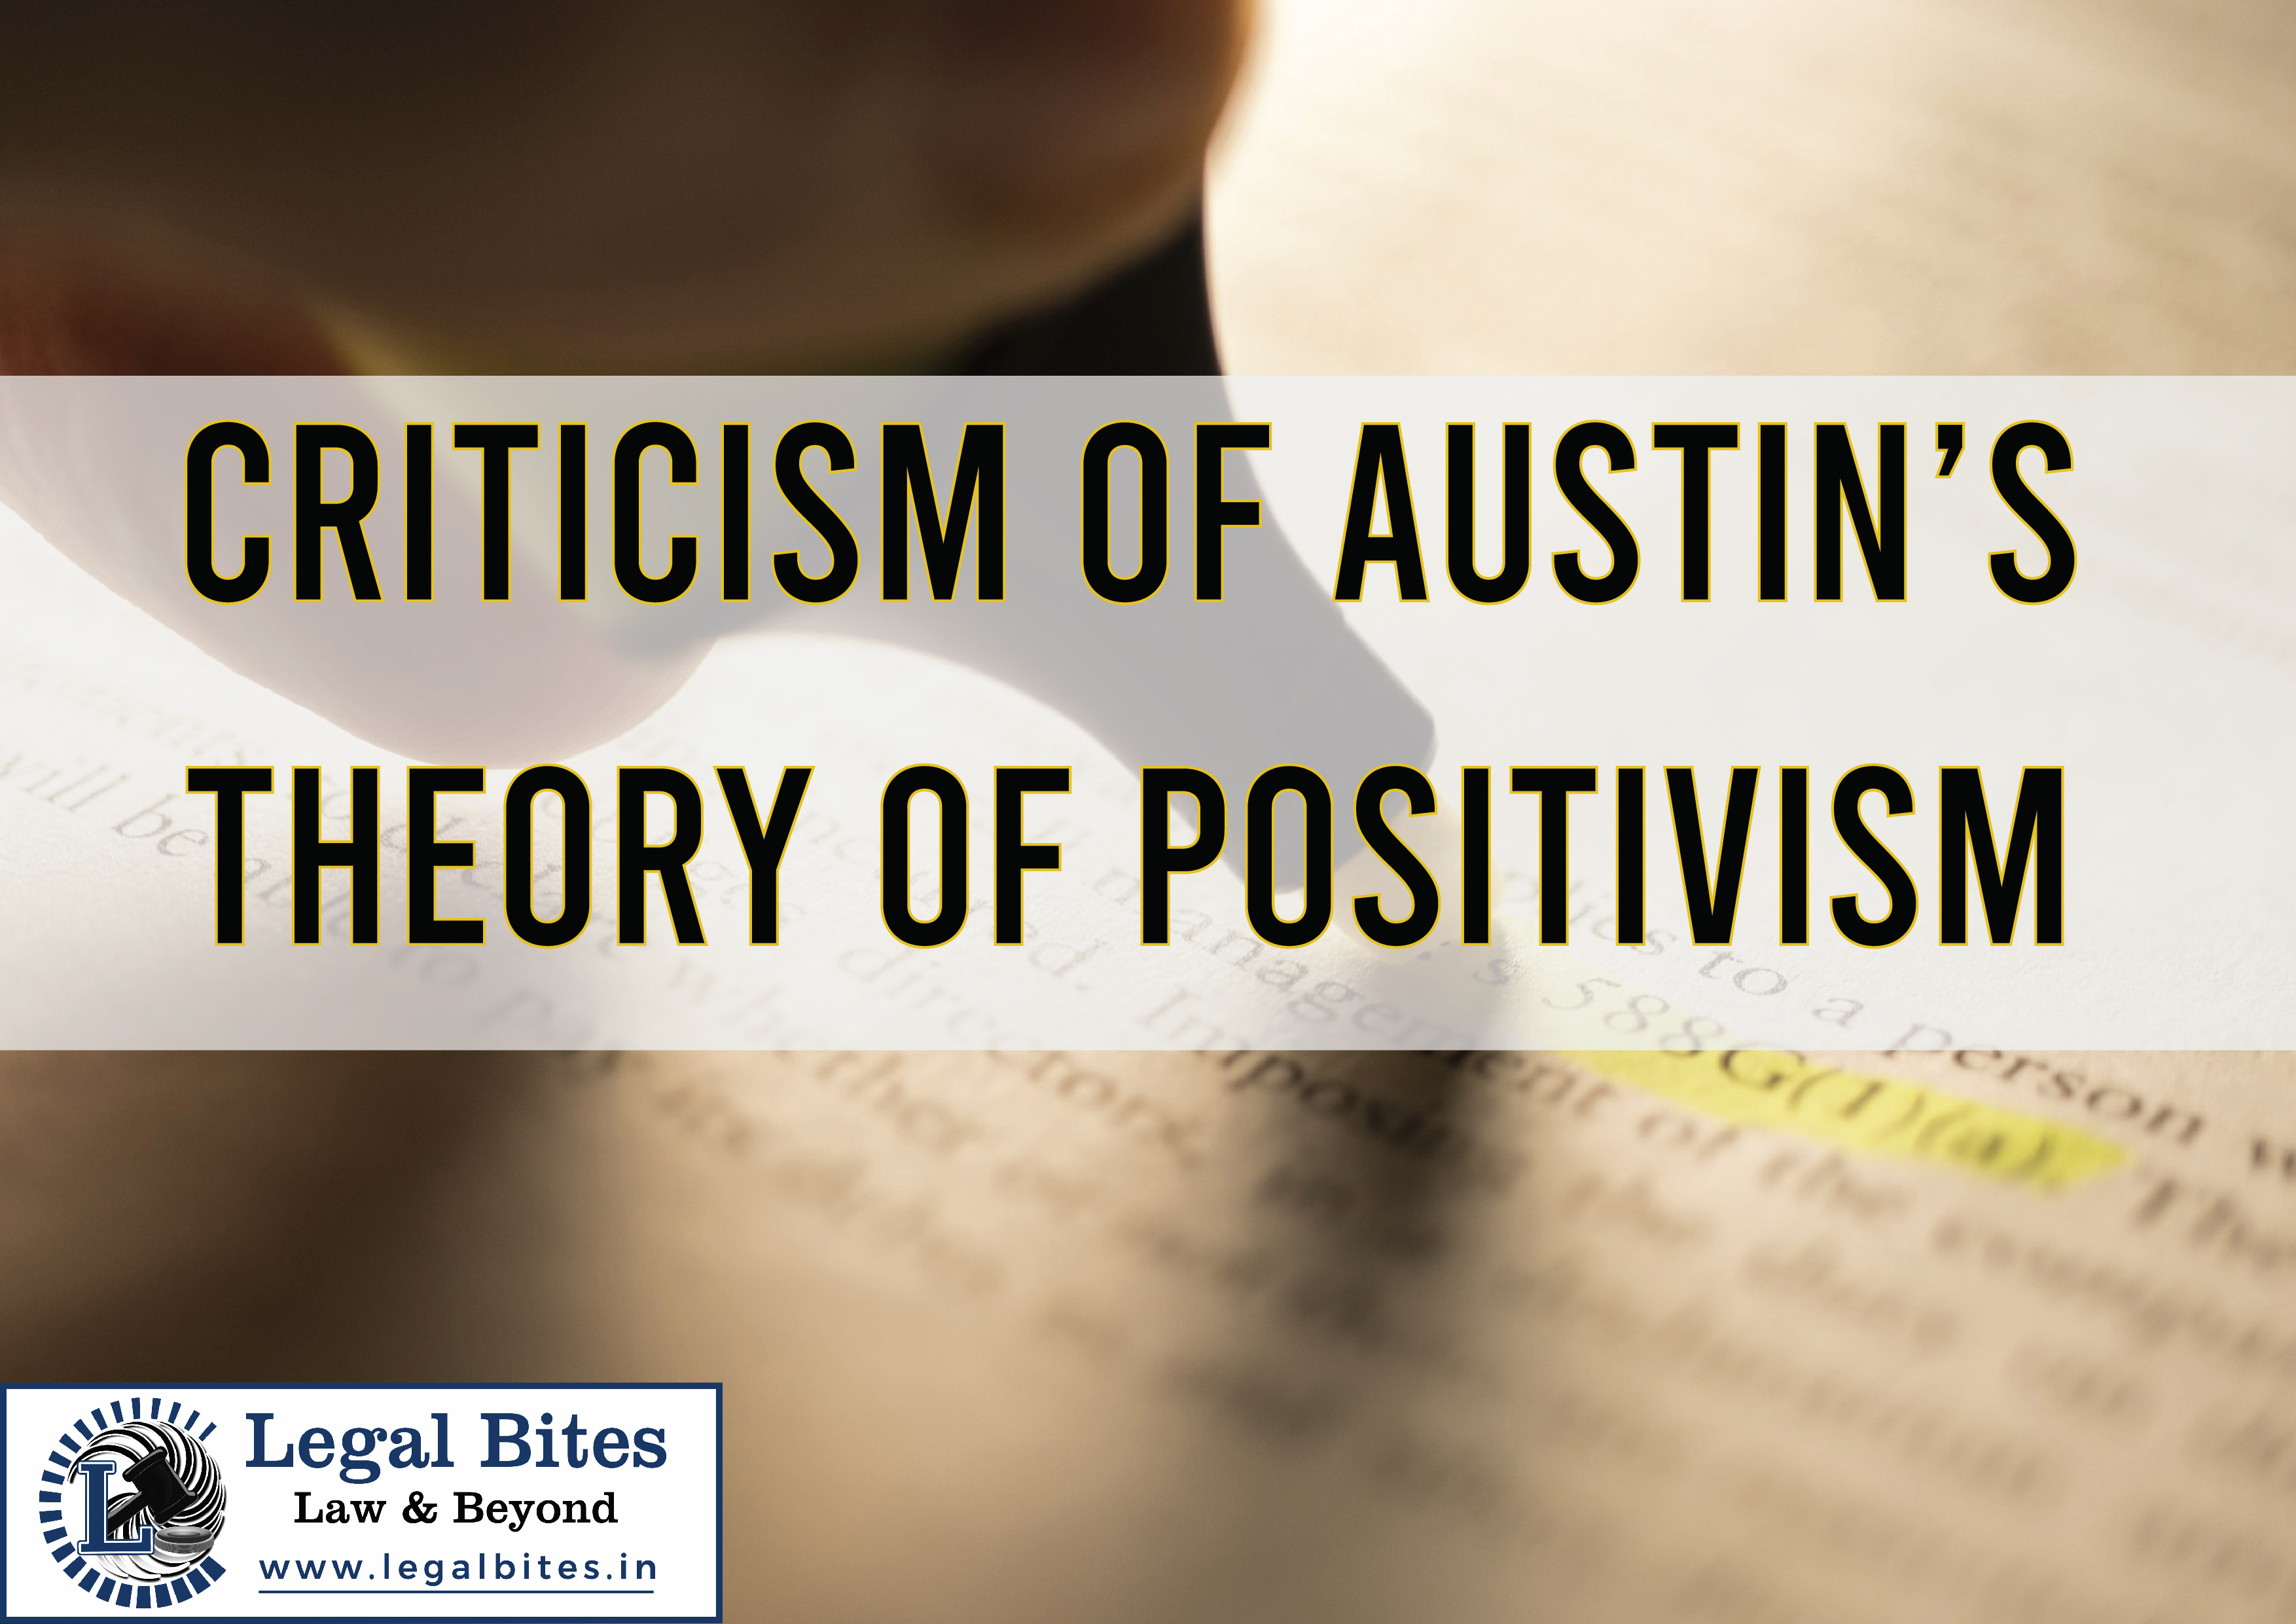 Criticism of Austin’s Theory of Positivism